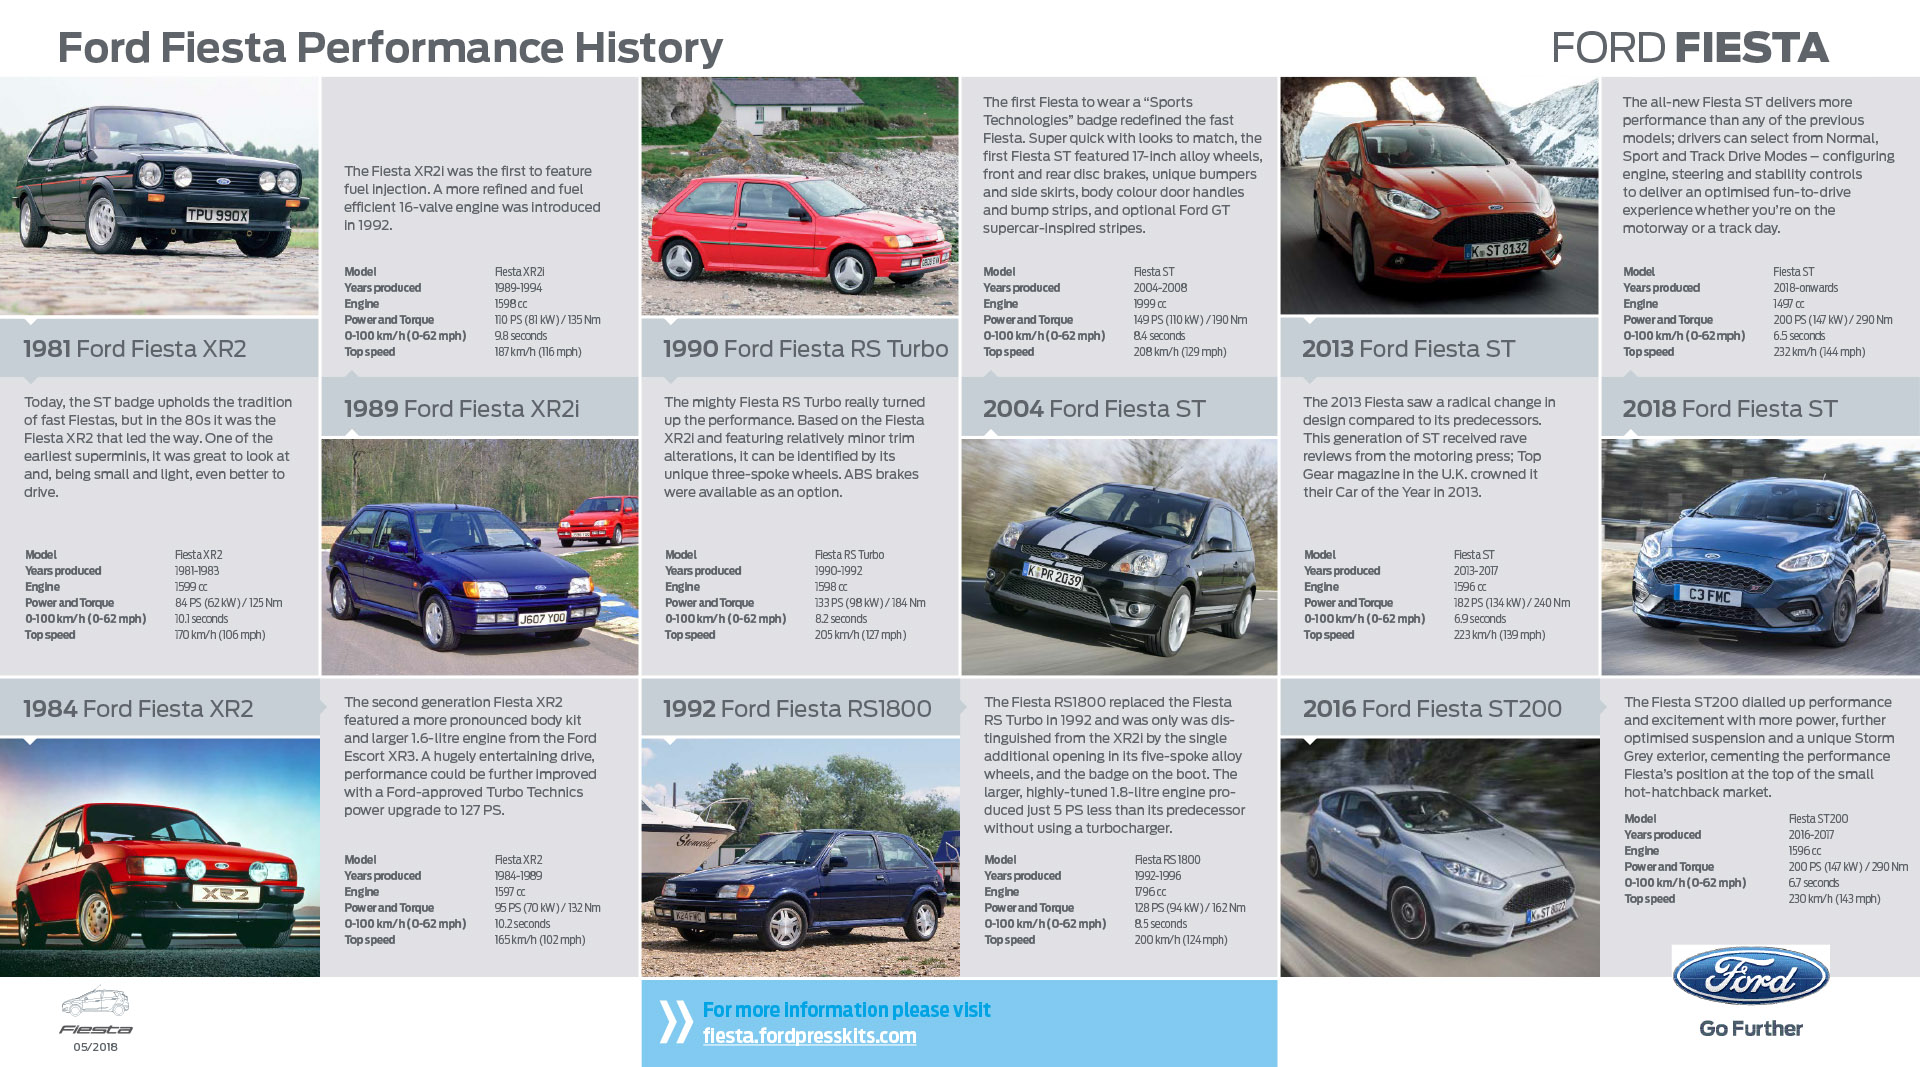 Ford Fiesta Performance history